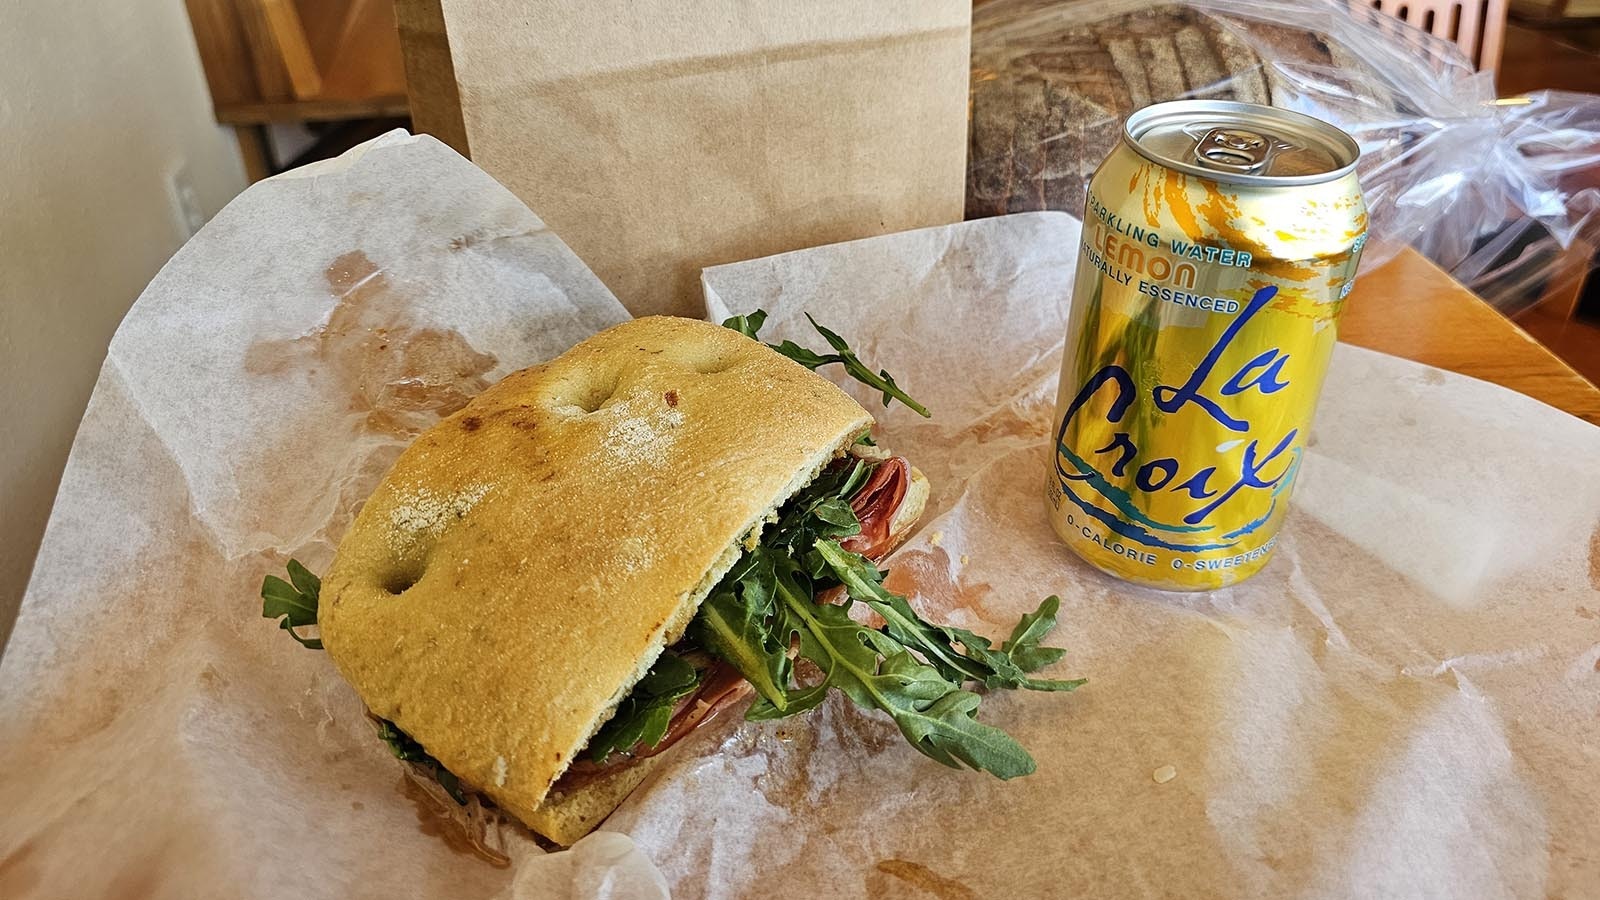 For lunch, an Italian sandwich on sourdough with leafy greens and sparkling lemon water. Very European!